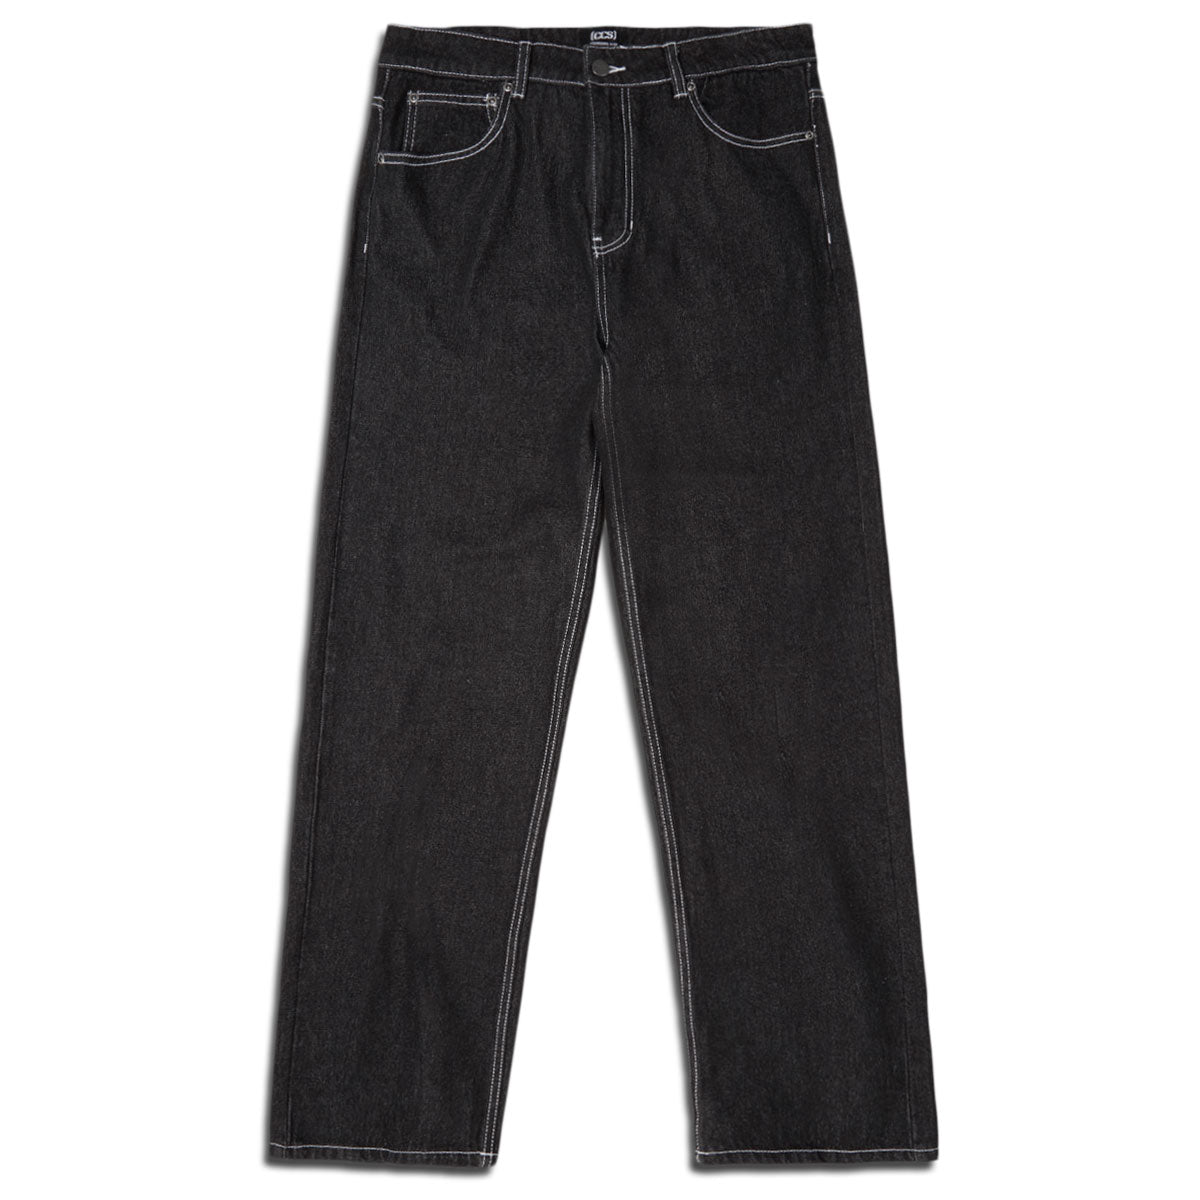 CCS Original Relaxed Denim Jeans - Overdyed Black image 5